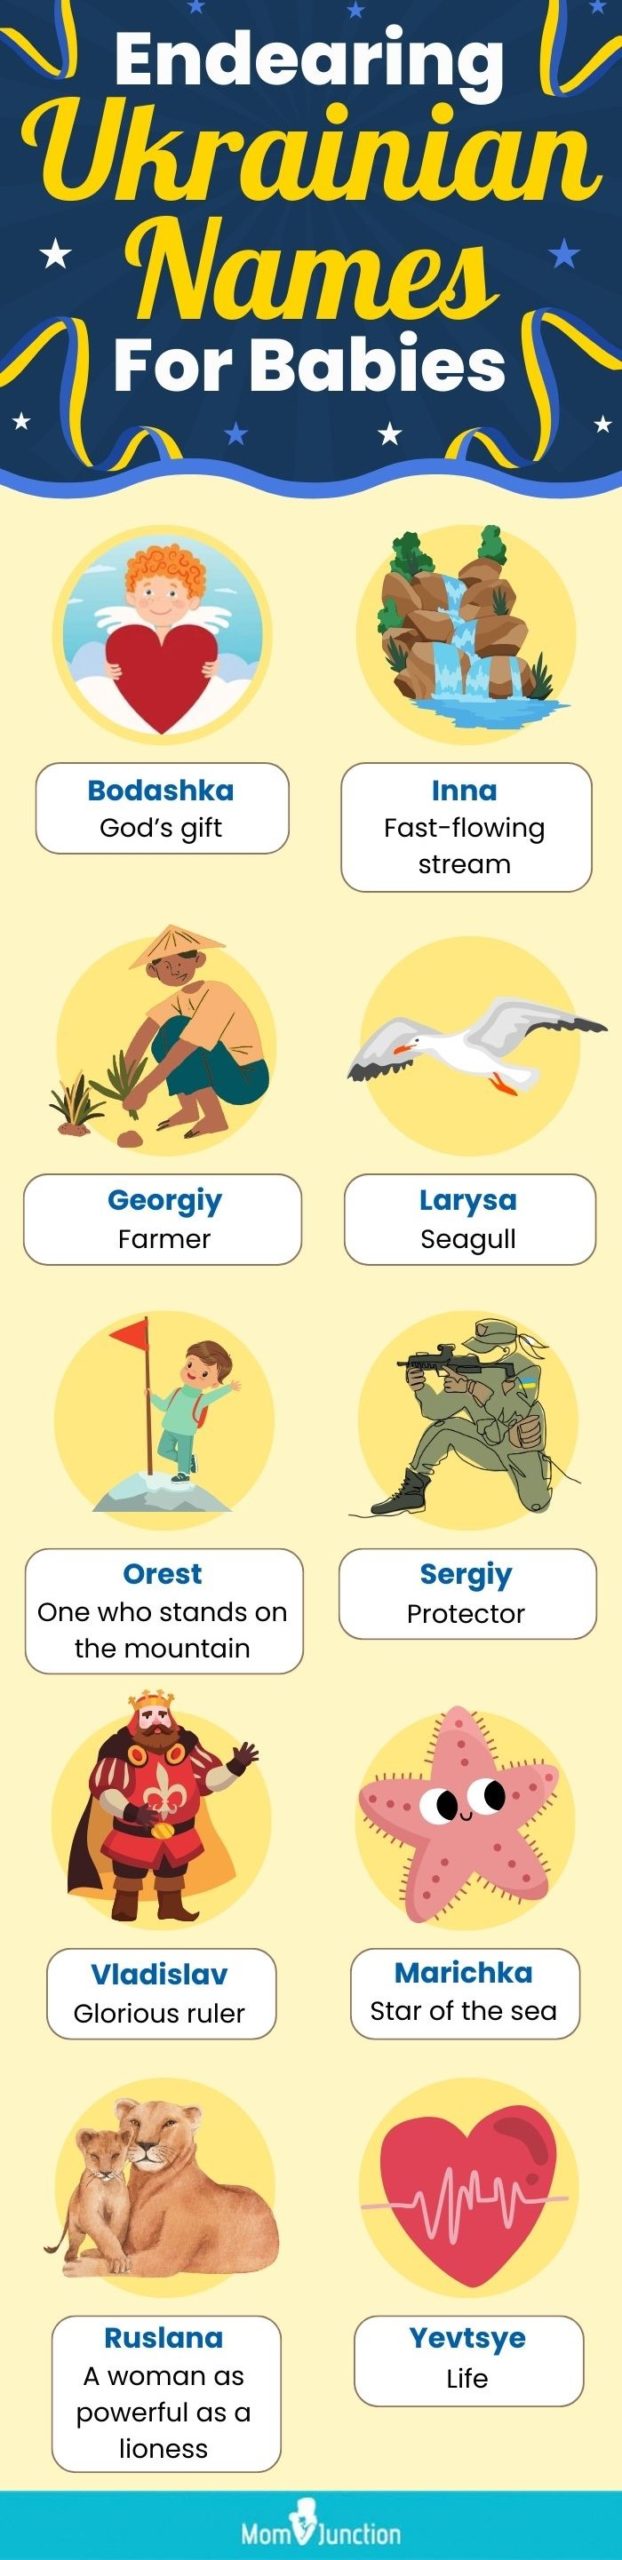 endearing ukrainian names for babies (infographic)